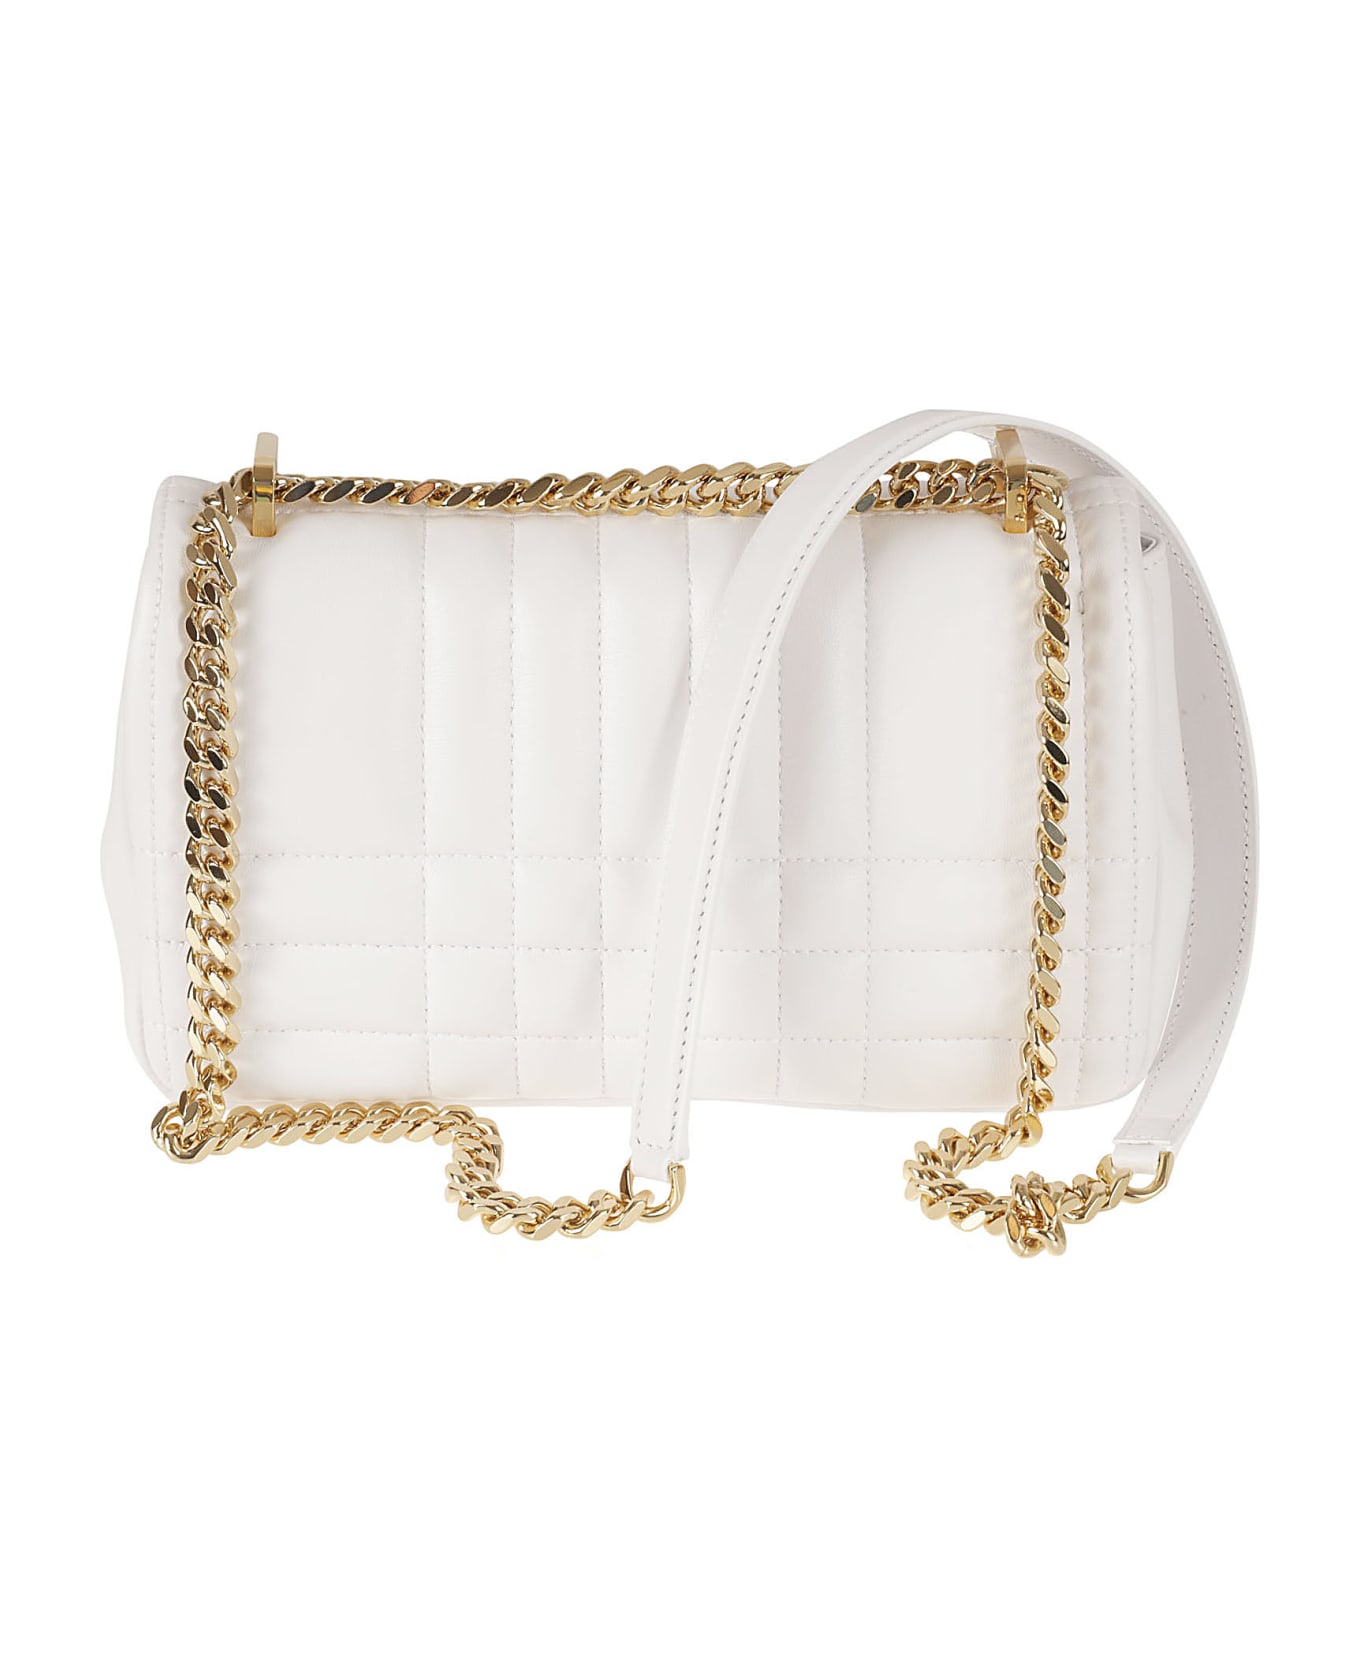 Burberry Chain Quilted Shoulder Bag - OPTIC WHITE